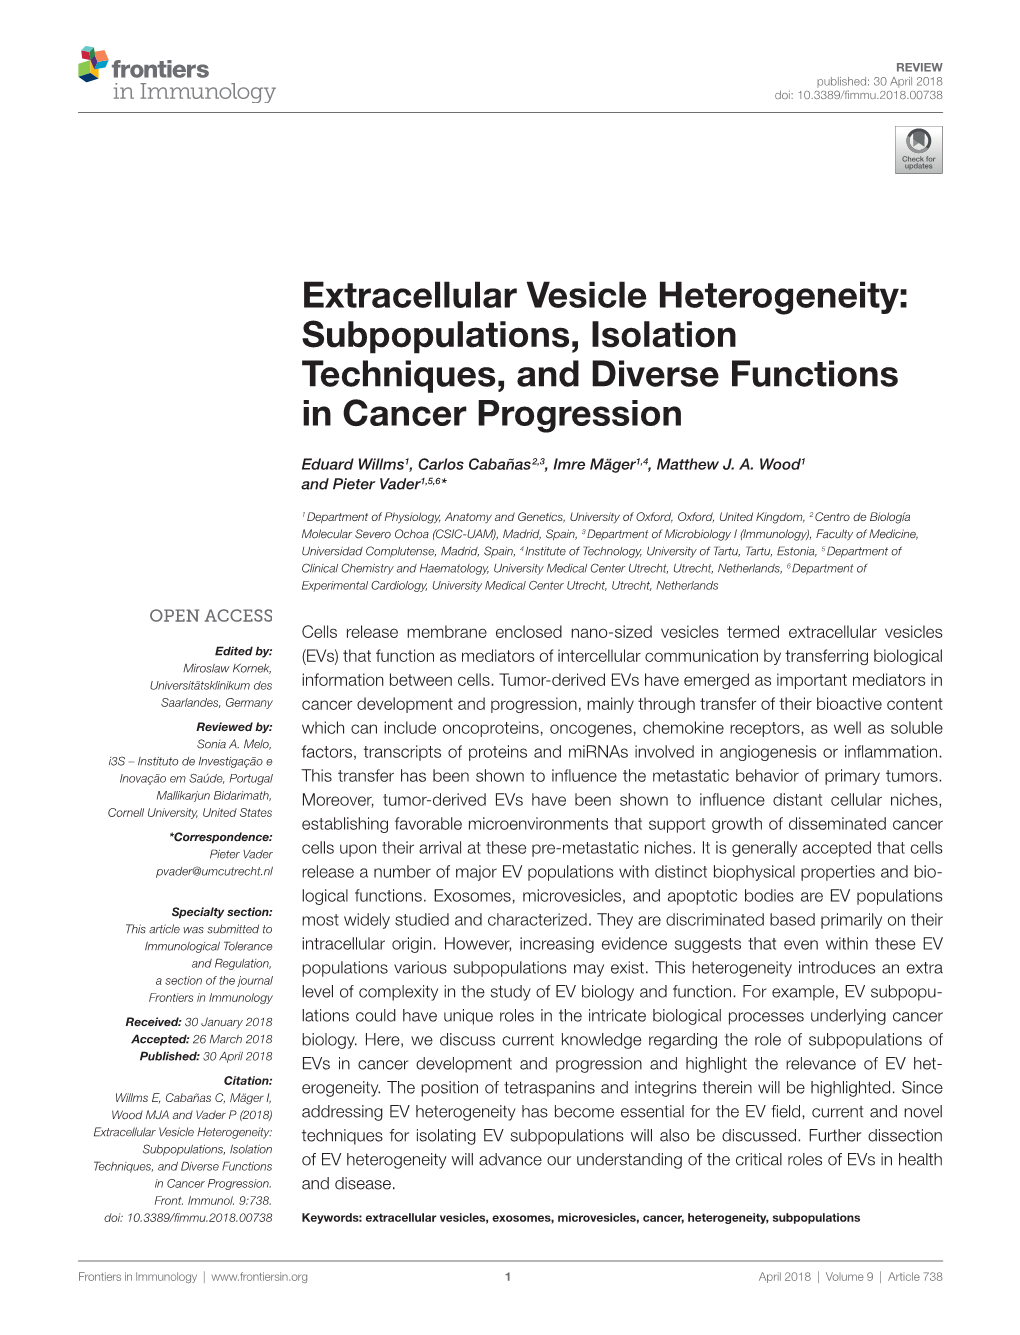 Extracellular Vesicle Heterogeneity: Subpopulations, Isolation Techniques, and Diverse Functions in Cancer Progression